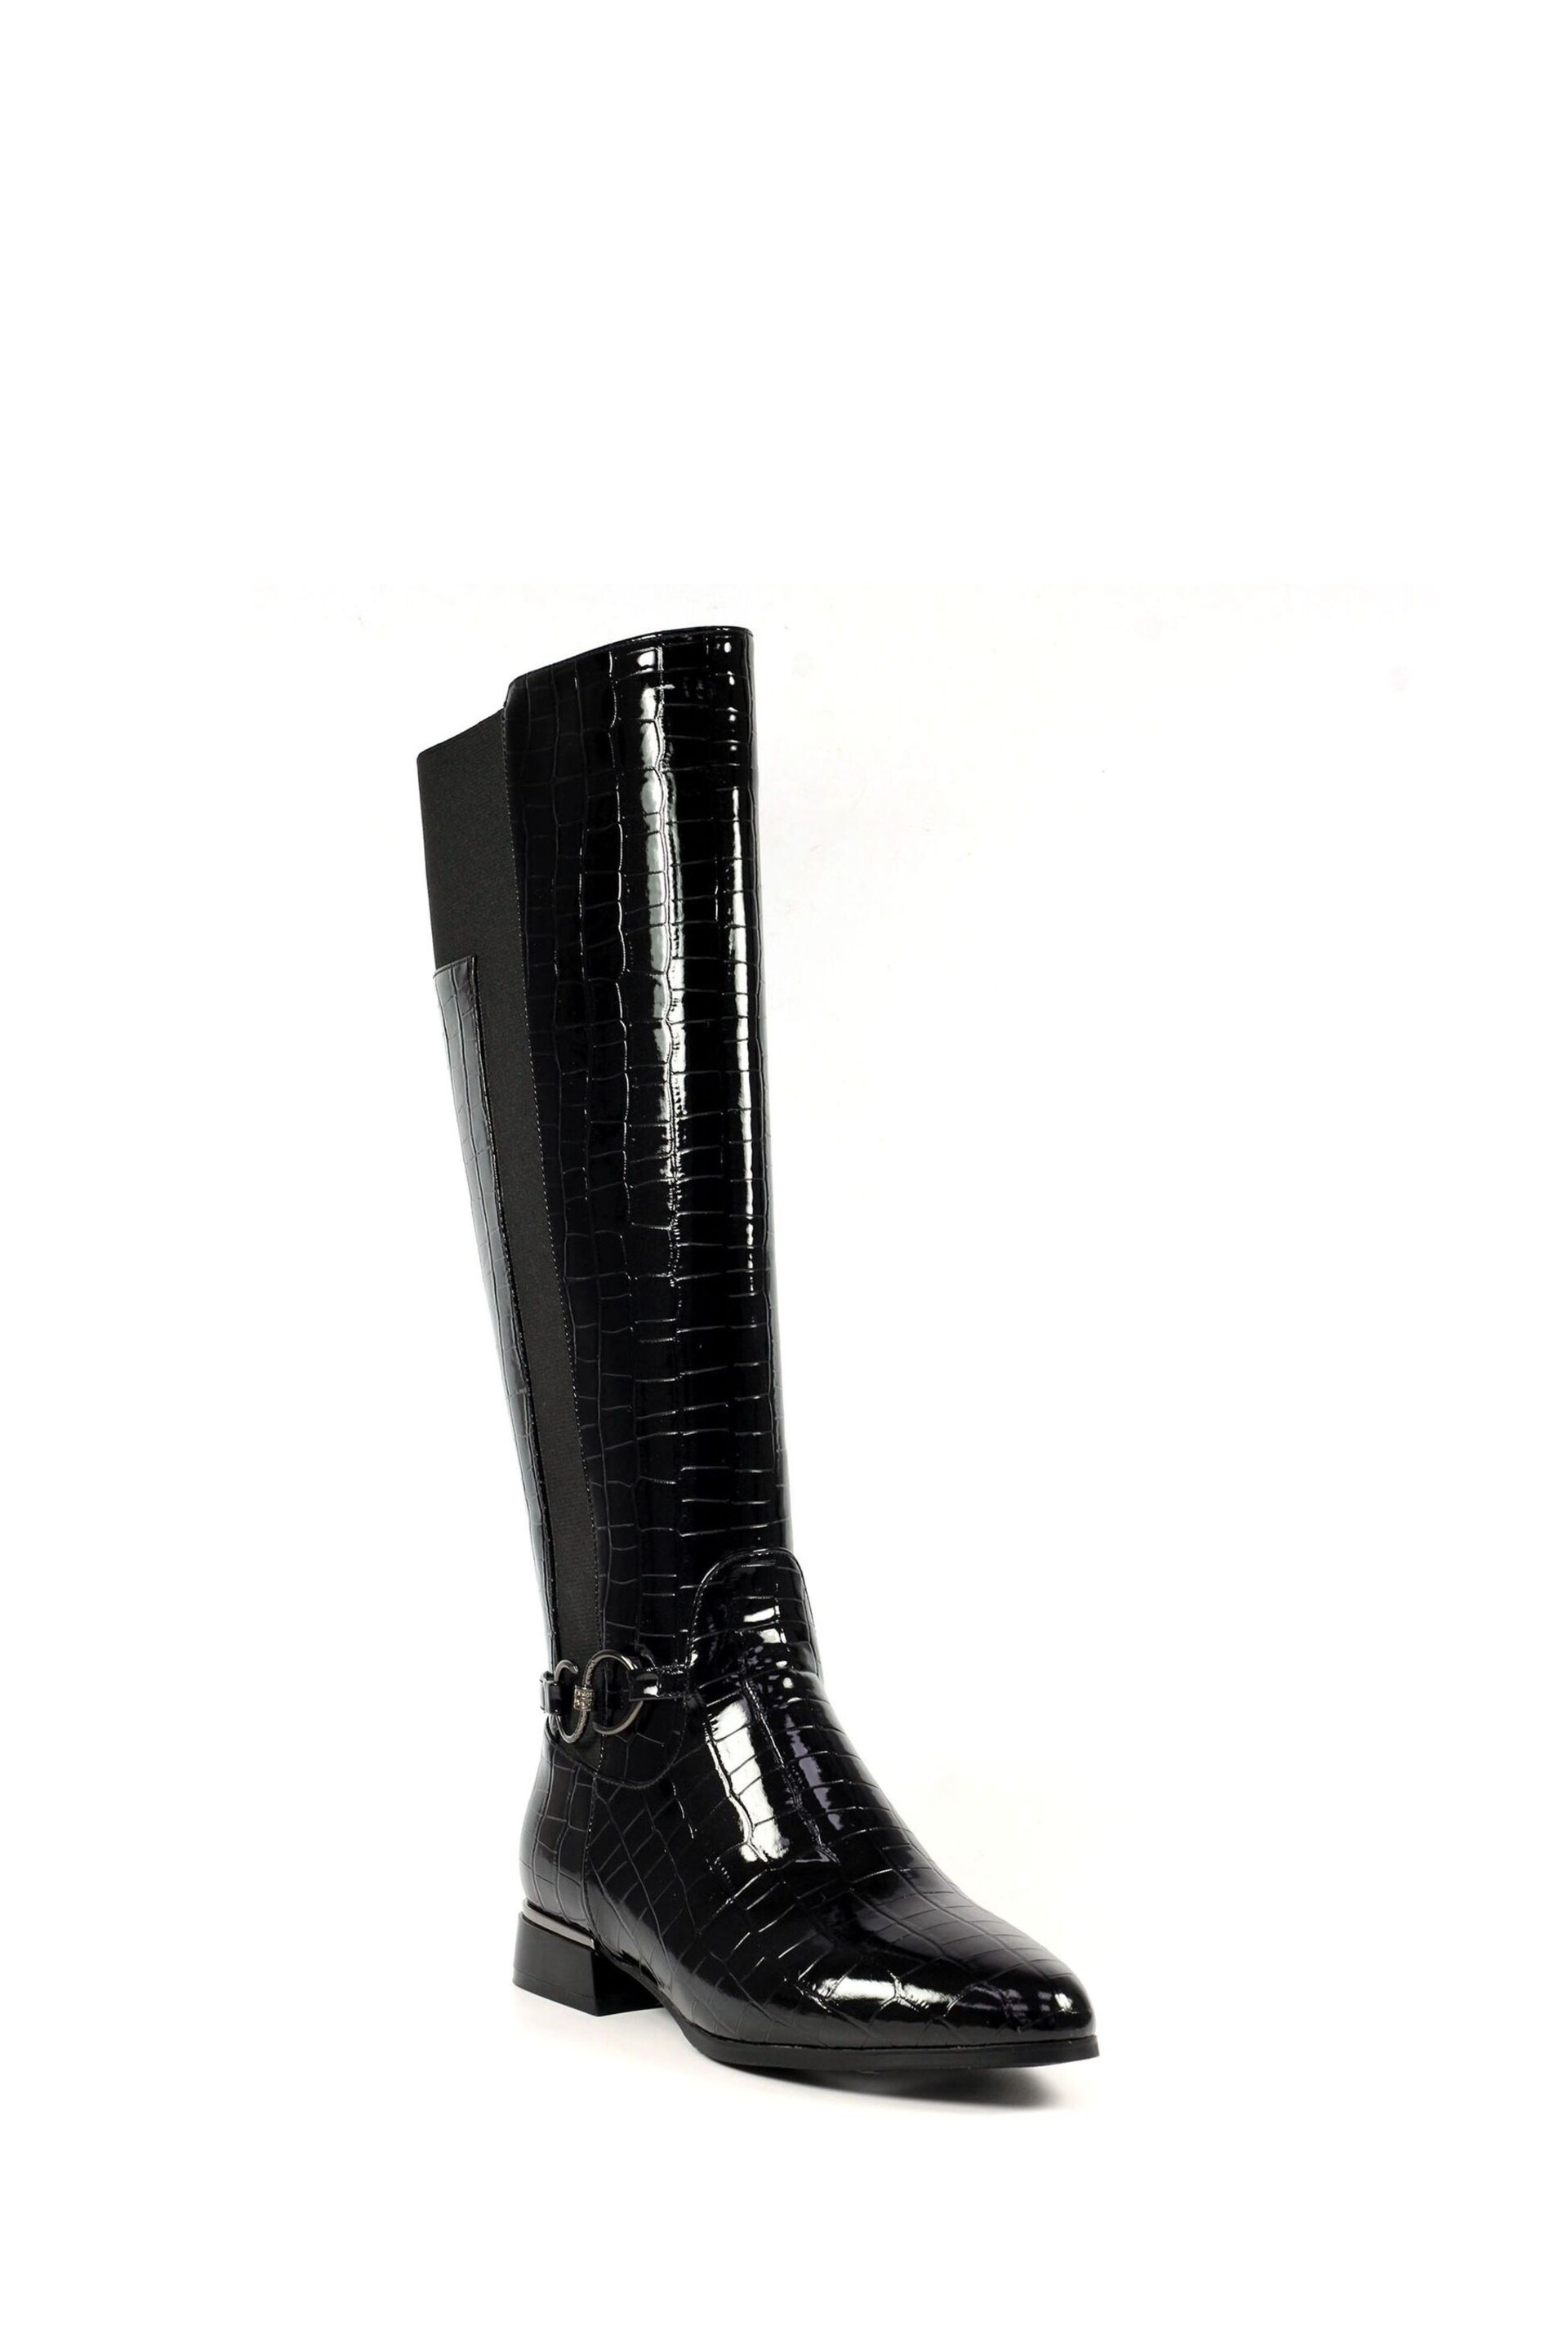 Lunar Reed Long Black Boots - Image 2 of 8